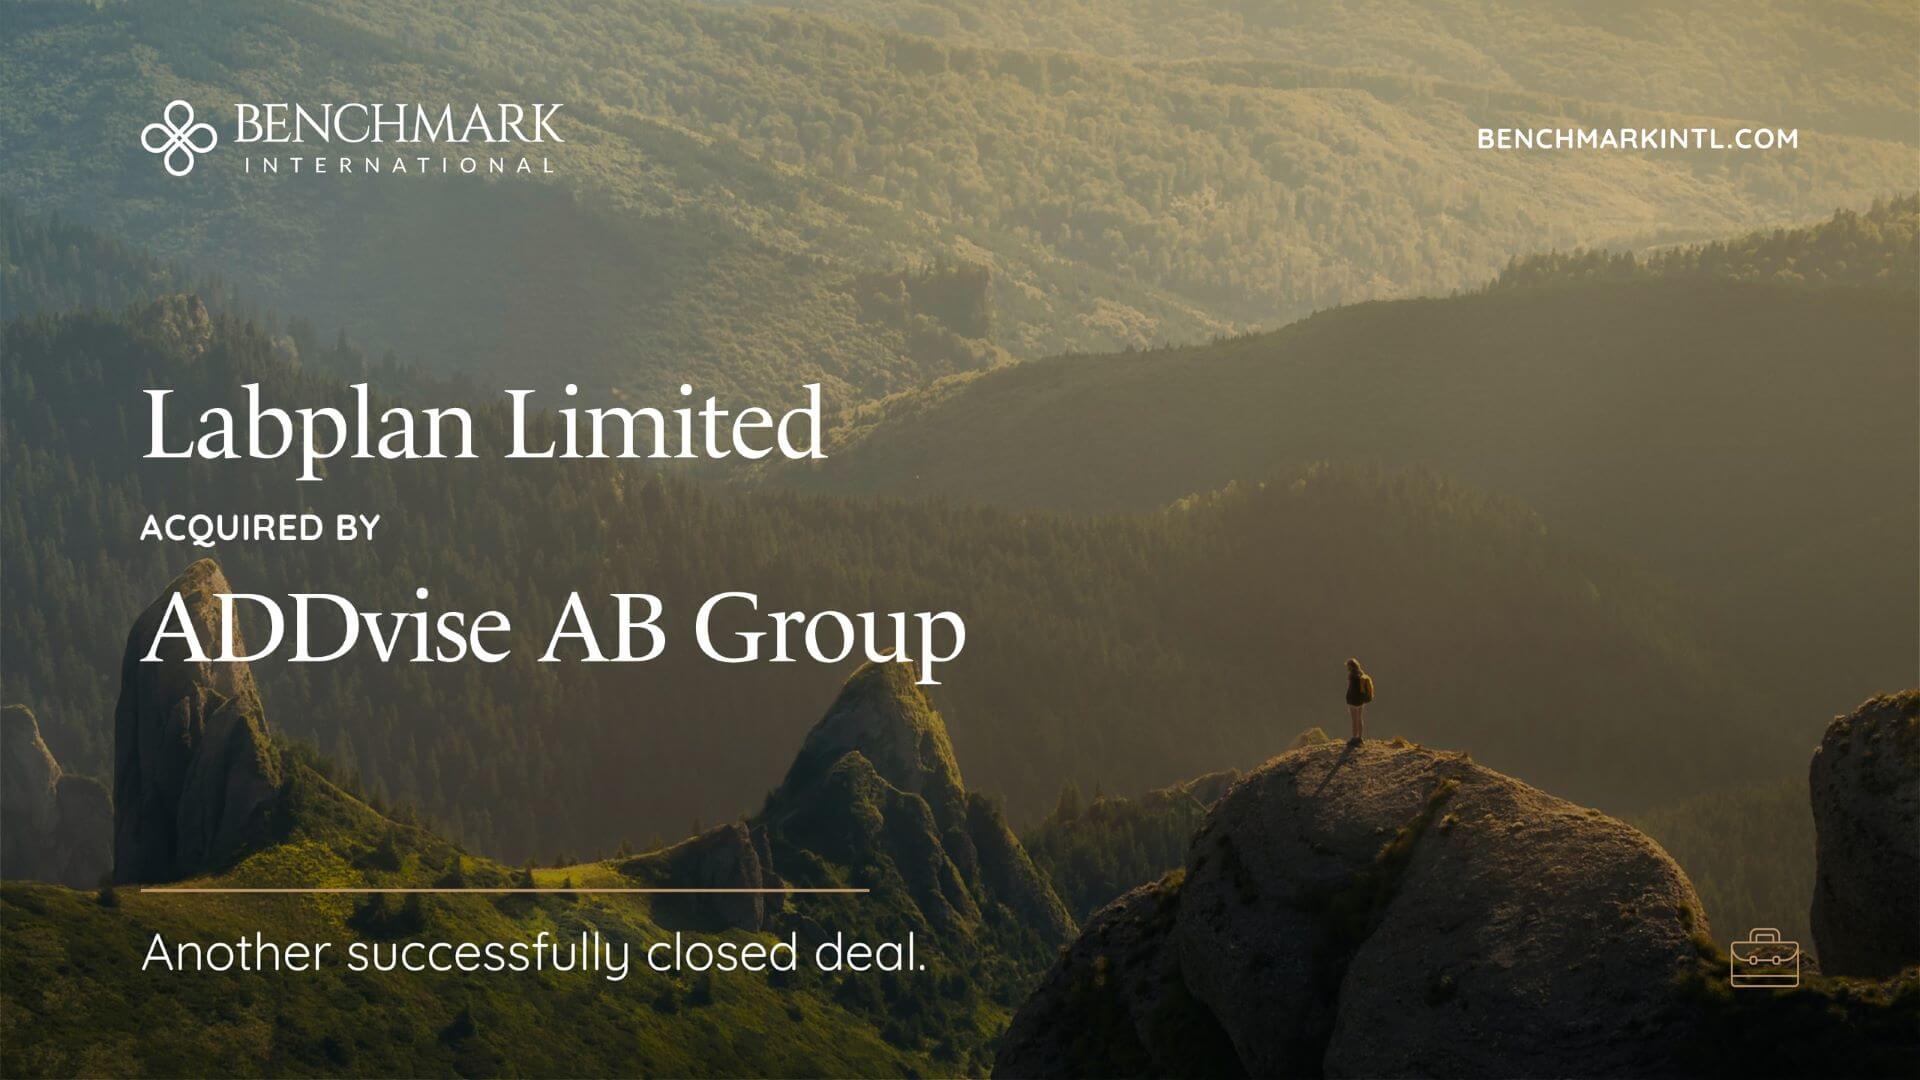 Benchmark International Successfully Facilitated the Transaction Between Labplan Limited and ADDvise AB Group